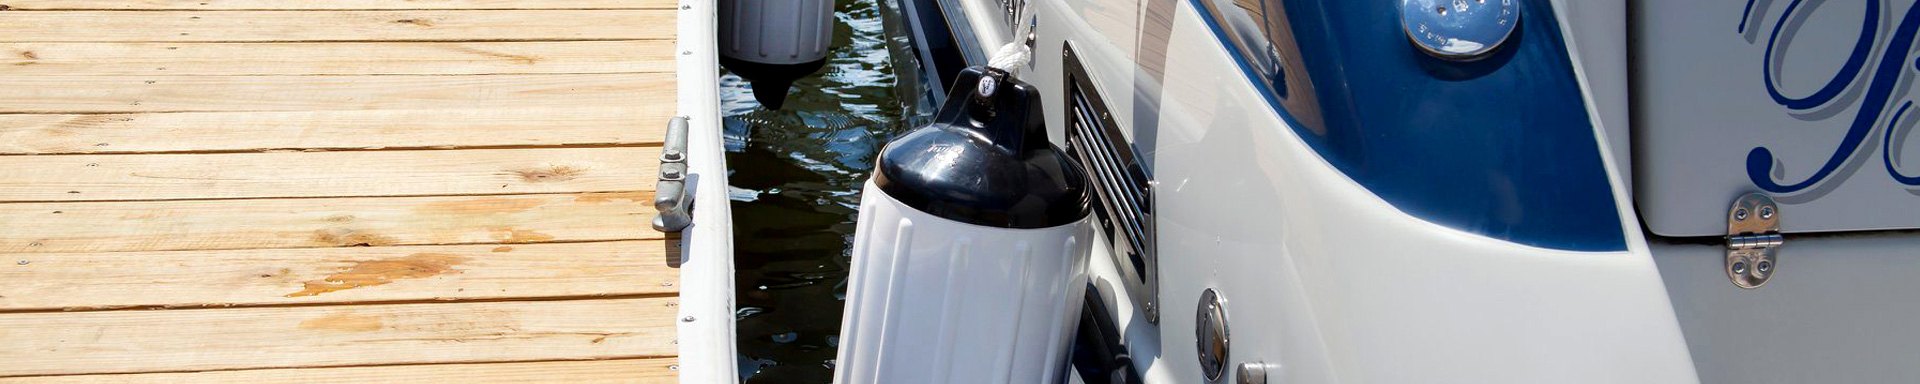 Protect Your Boat Properly With Boat Fenders and Dock Bumpers